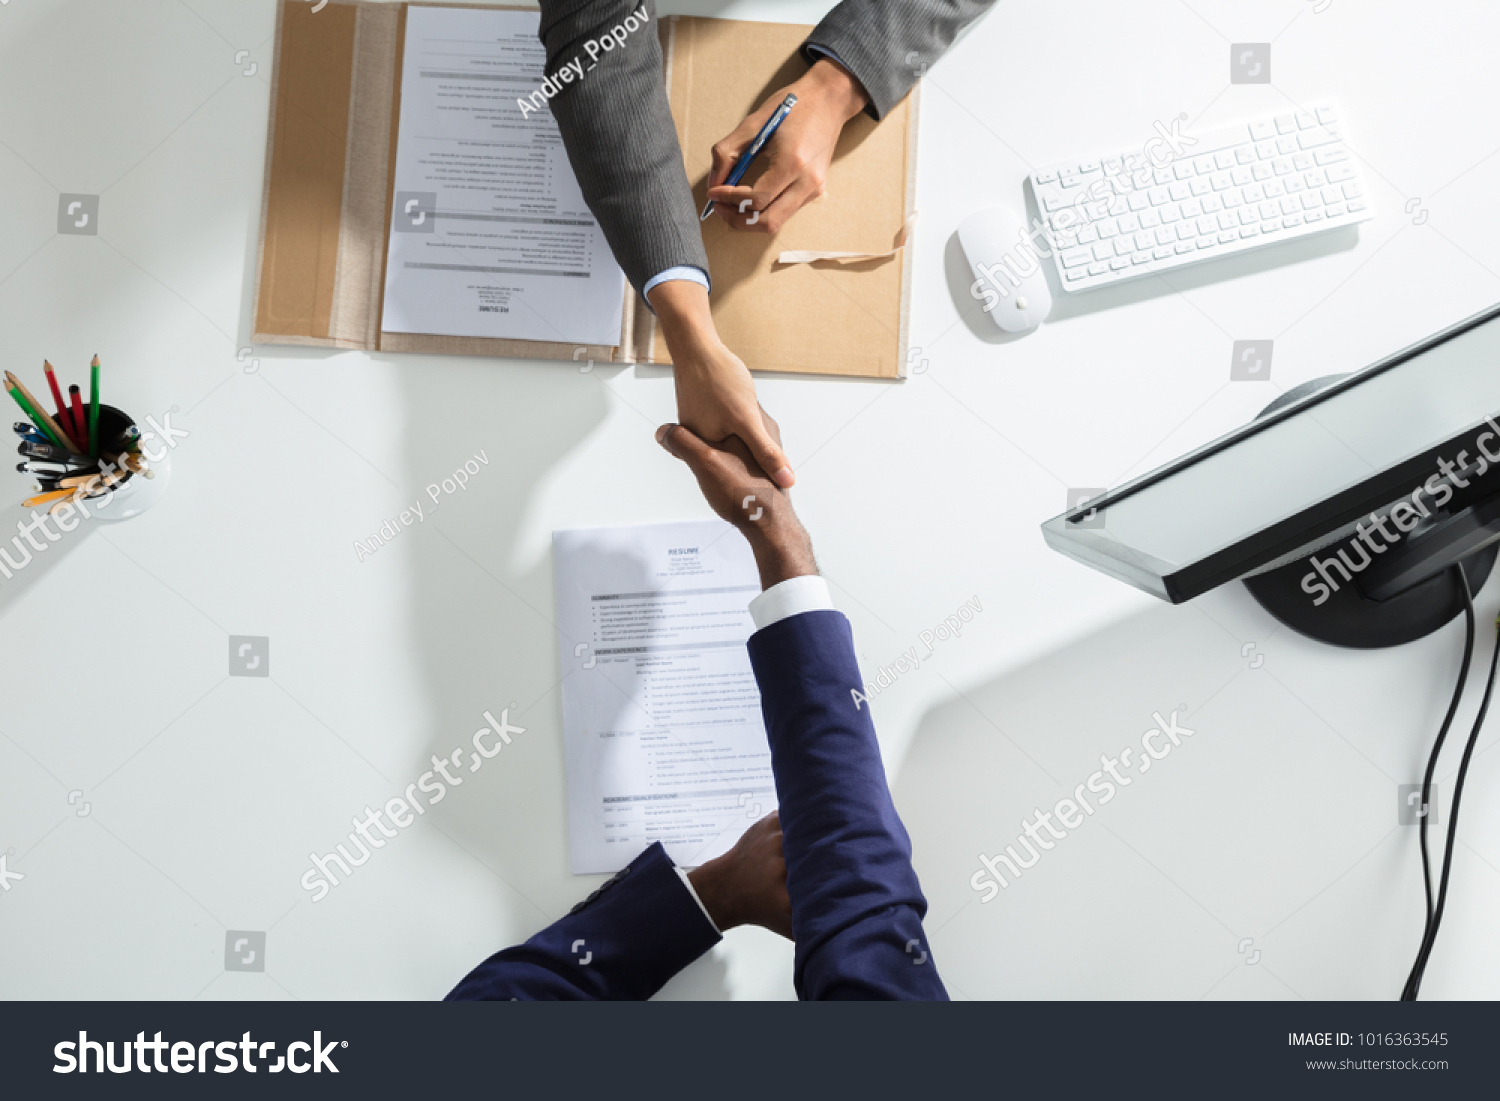 High Angle View Of Businessperson Shaking Hand With Candidate Over White Desk #1016363545